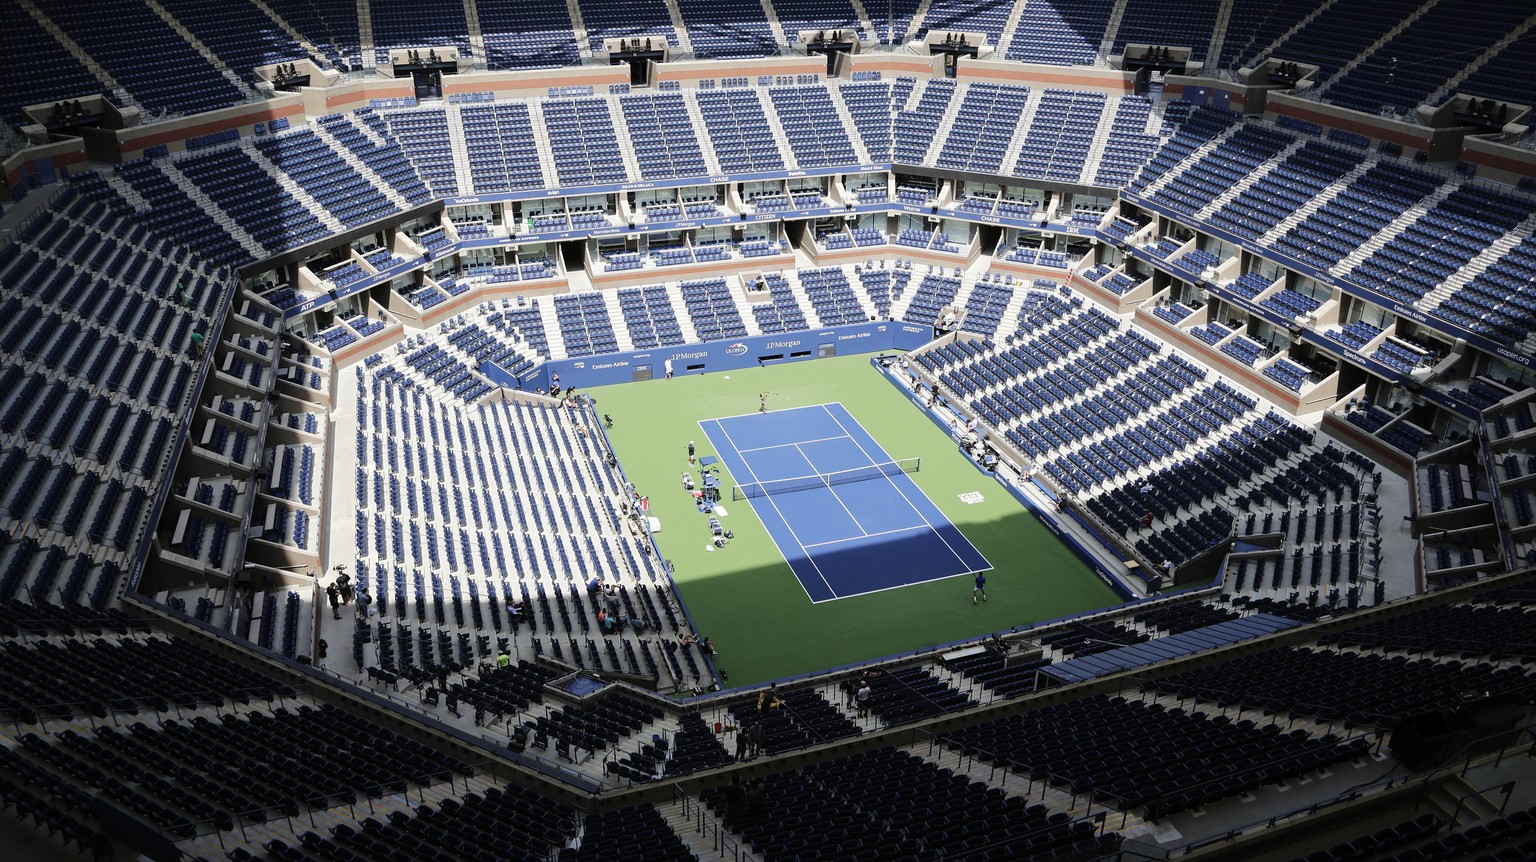 FILE - In this Aug. 27, 2017, file photo, players practice for the U.S. Open tennis tournament at Arthur Ashe Stadium in New York. As coronavirus cases spike in other parts of the country a month befo ...